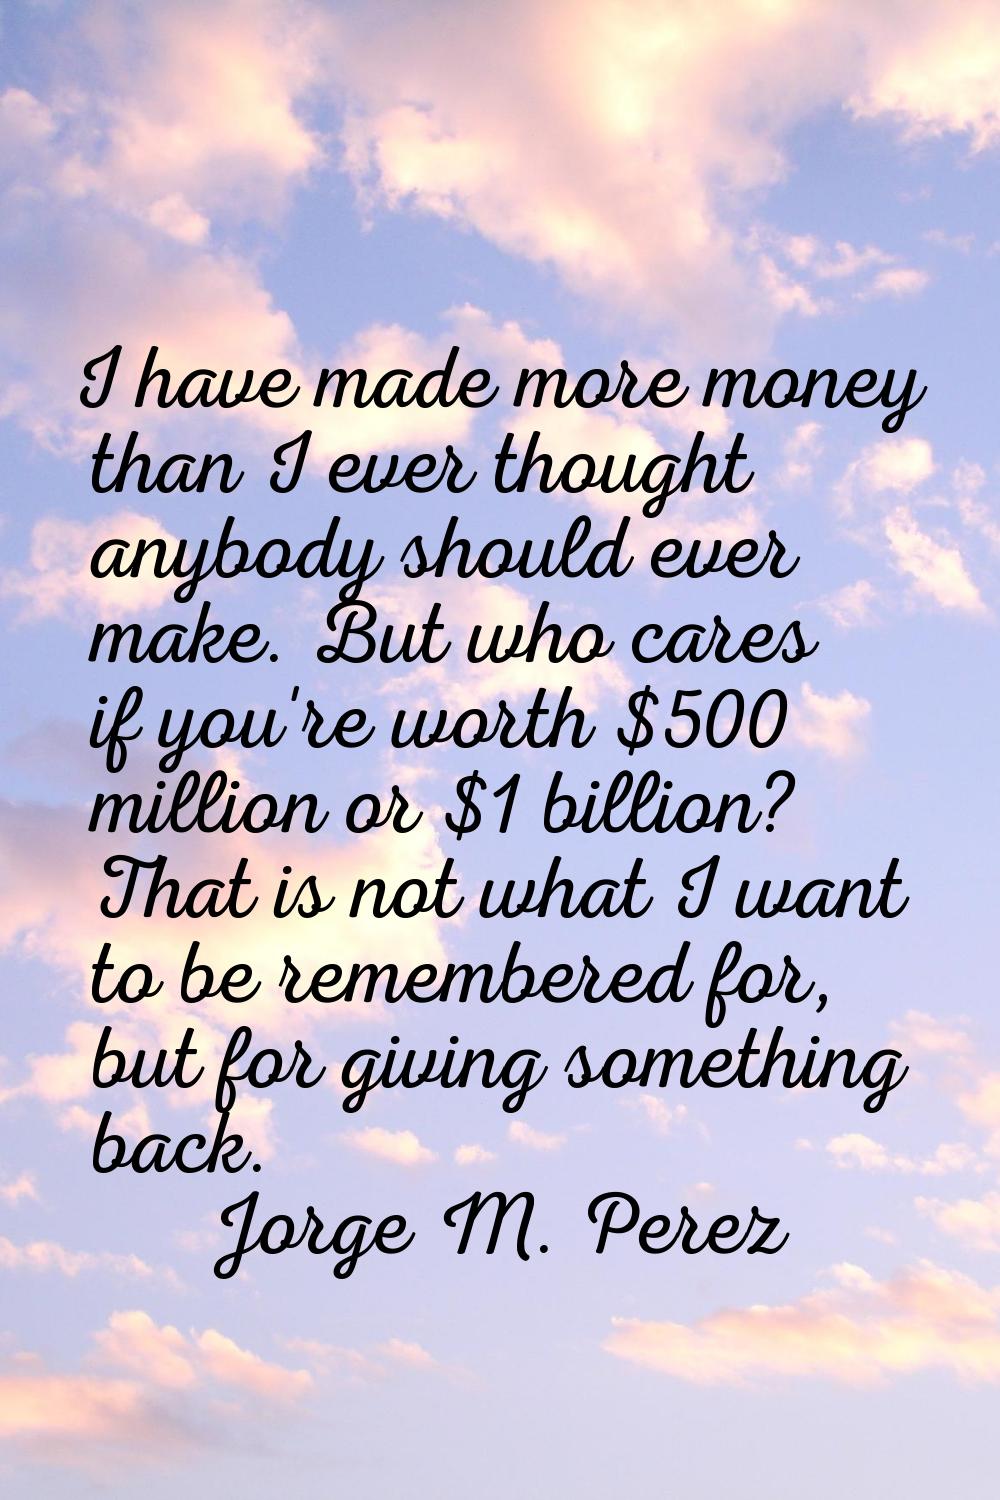 I have made more money than I ever thought anybody should ever make. But who cares if you're worth 